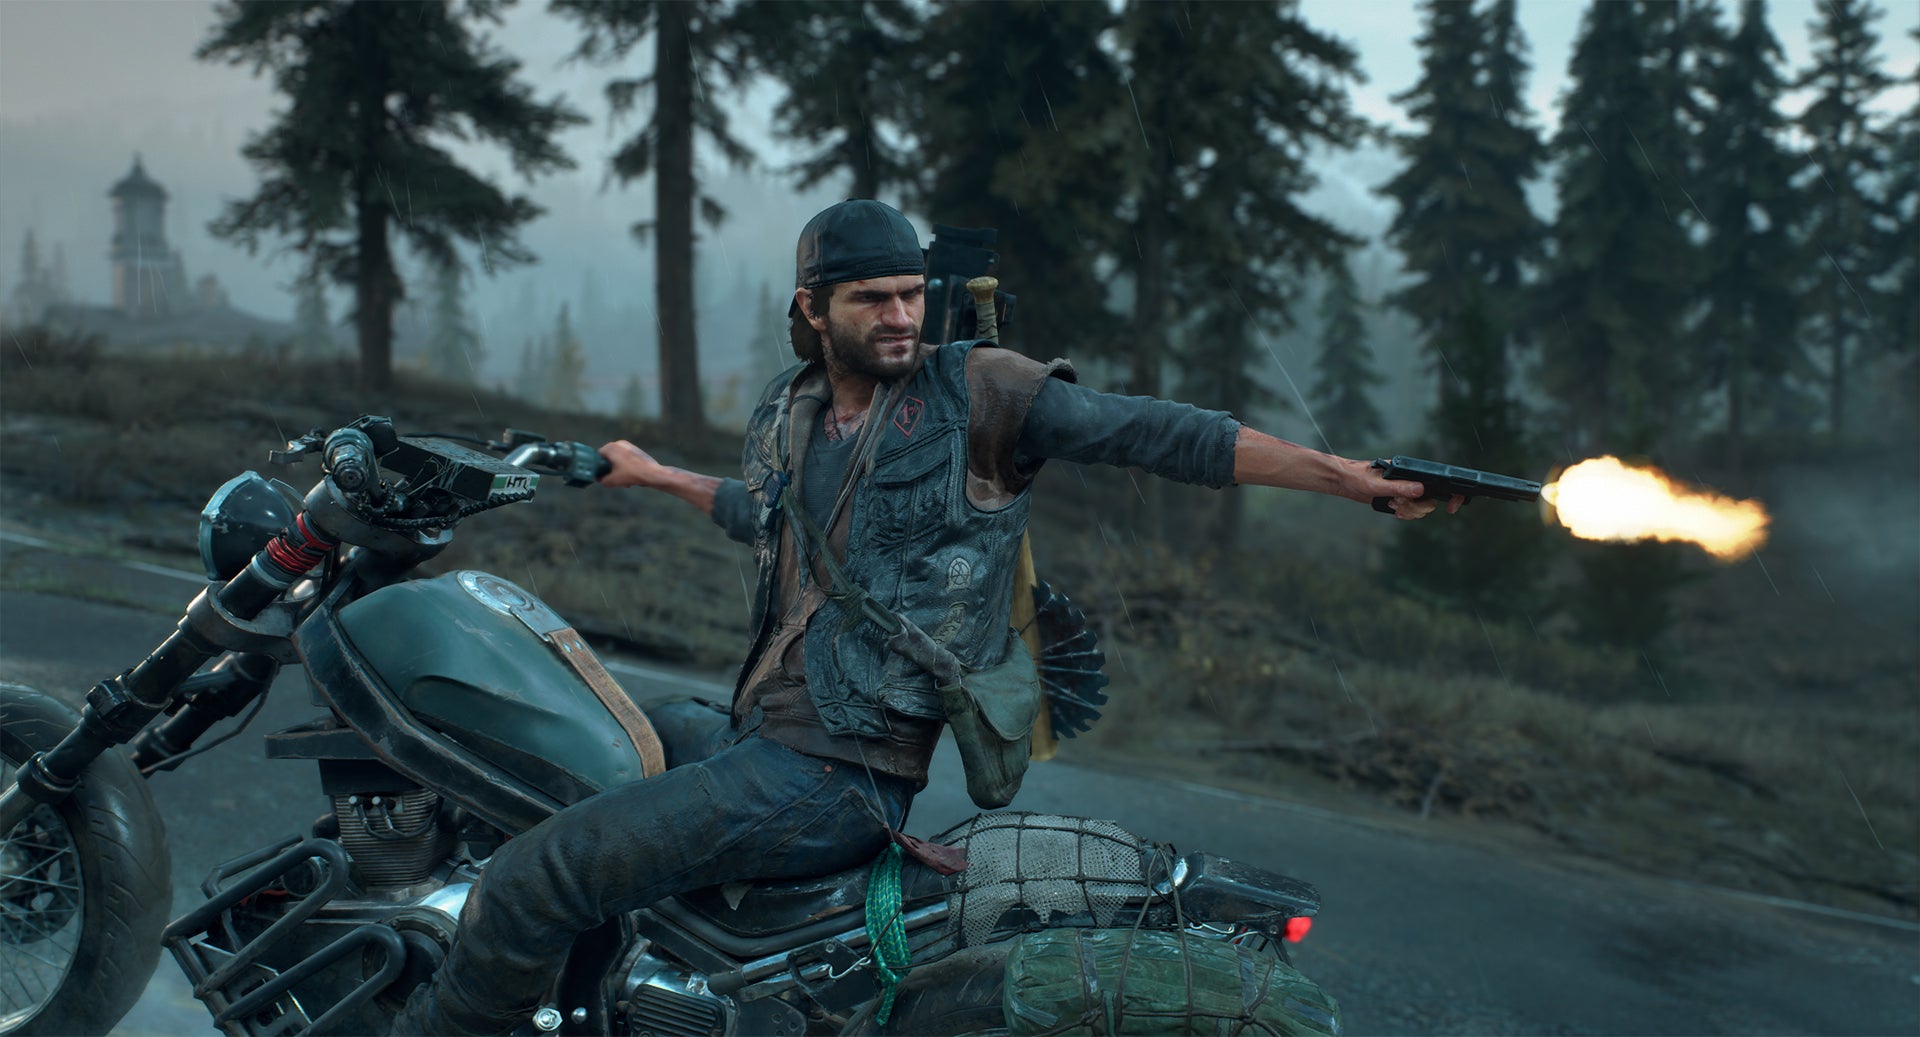 Image for FEMA, Militias and Motorcycle Gangs: Days Gone's Apocalyptic Politics